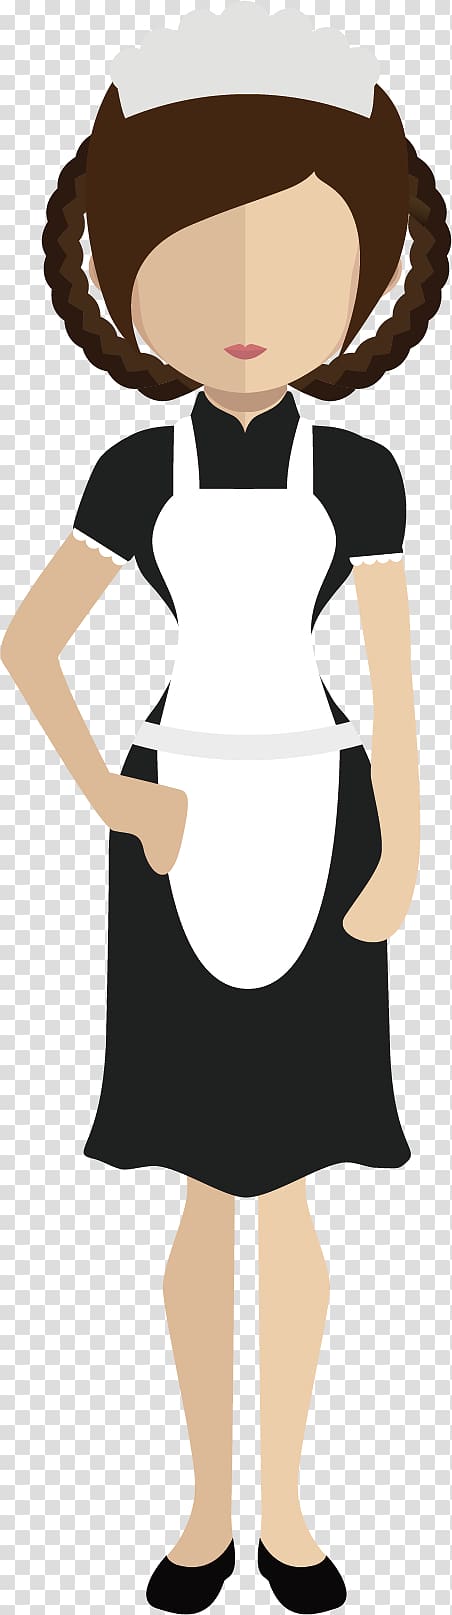 Girl with A Black Cat Drawing Cartoon Nursing, Field nurse transparent background PNG clipart